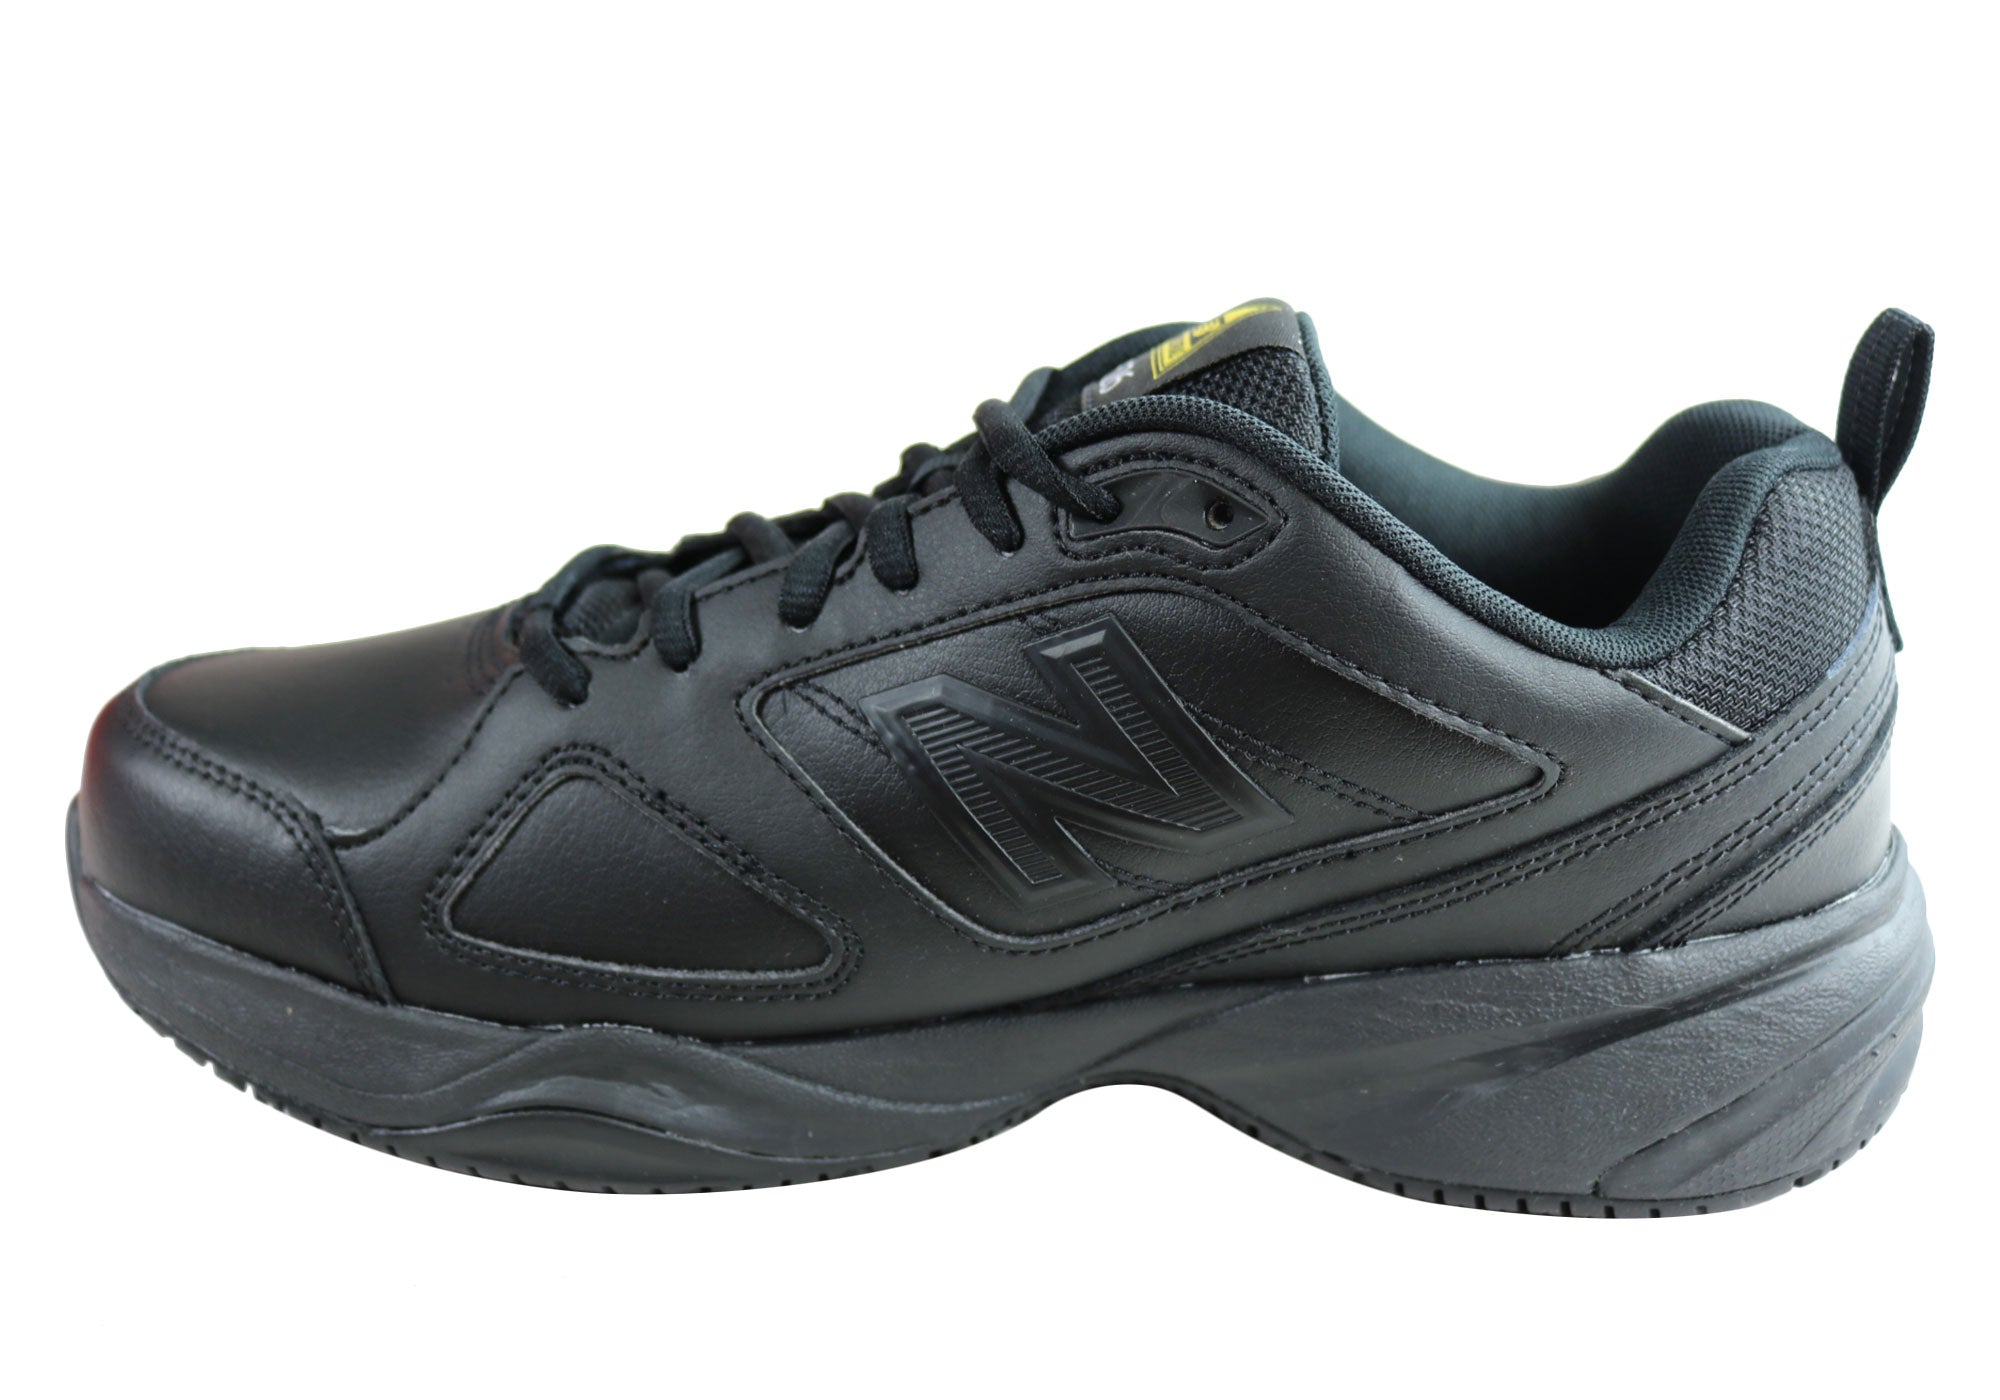 New Balance Womens 626 Wide Fit Slip Resistant Work Shoes | Brand House ...